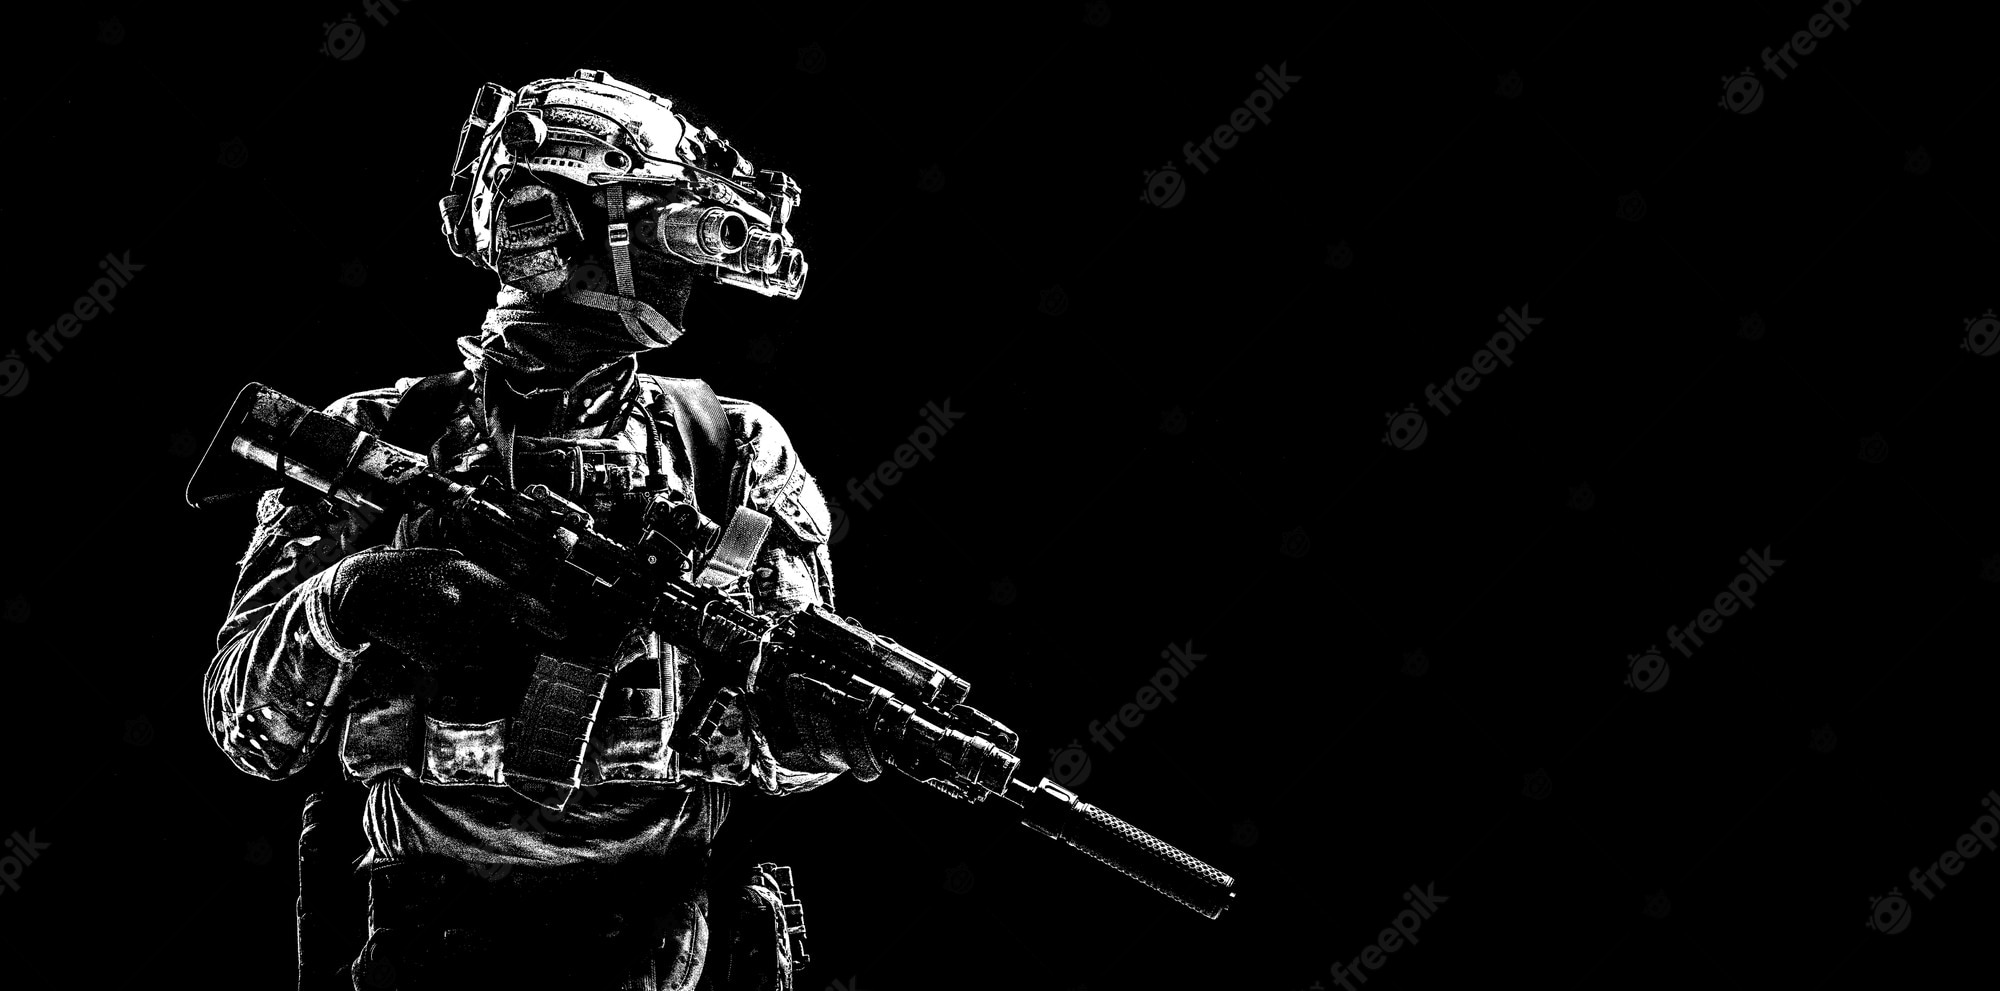 Premium Photo. Modern army special forces equipped soldier, anti terrorist squad fighter, elite mercenary armed assault rifle, standing in darkness with night vision goggles on helmet, studio portrait, copyspace